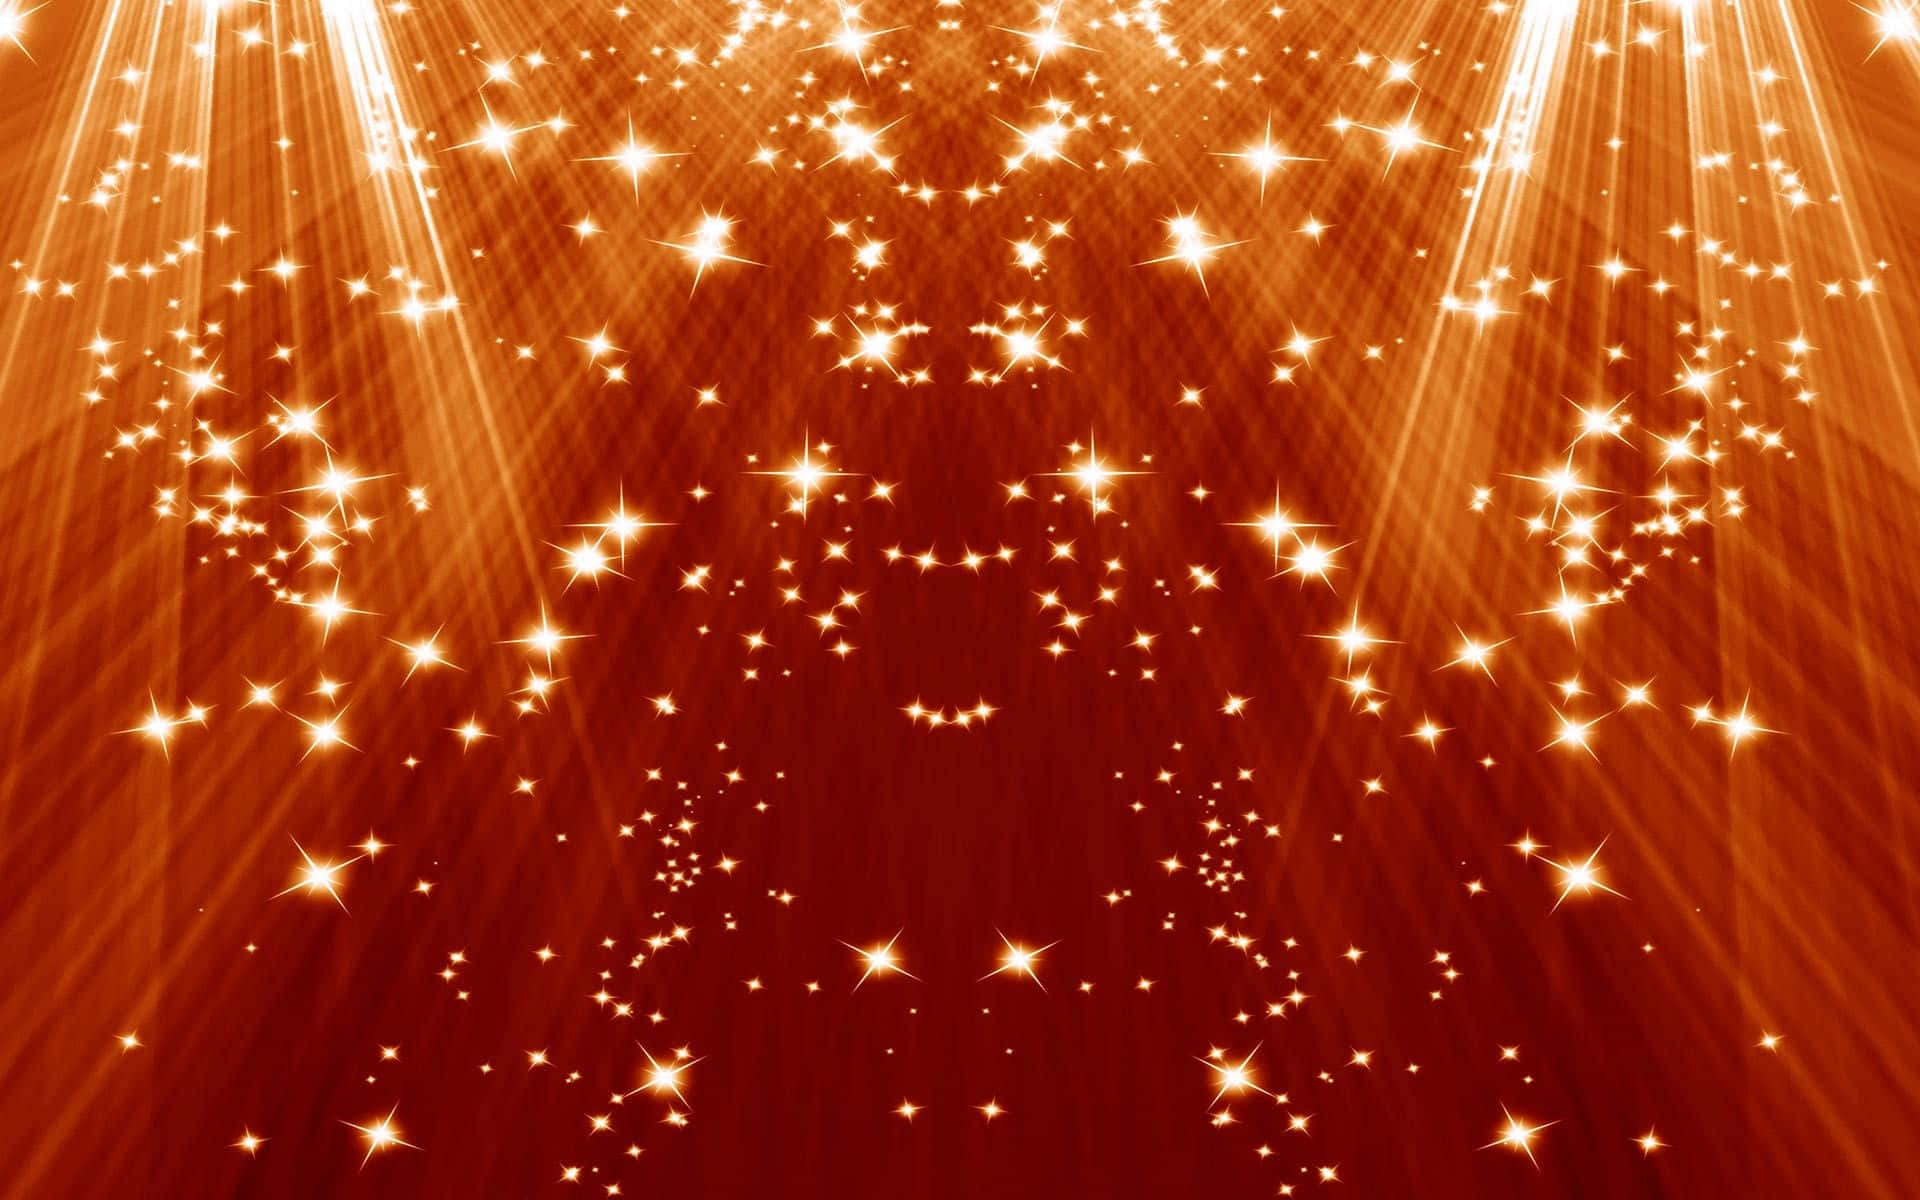 A Golden Background With Stars Shining In The Light Wallpaper